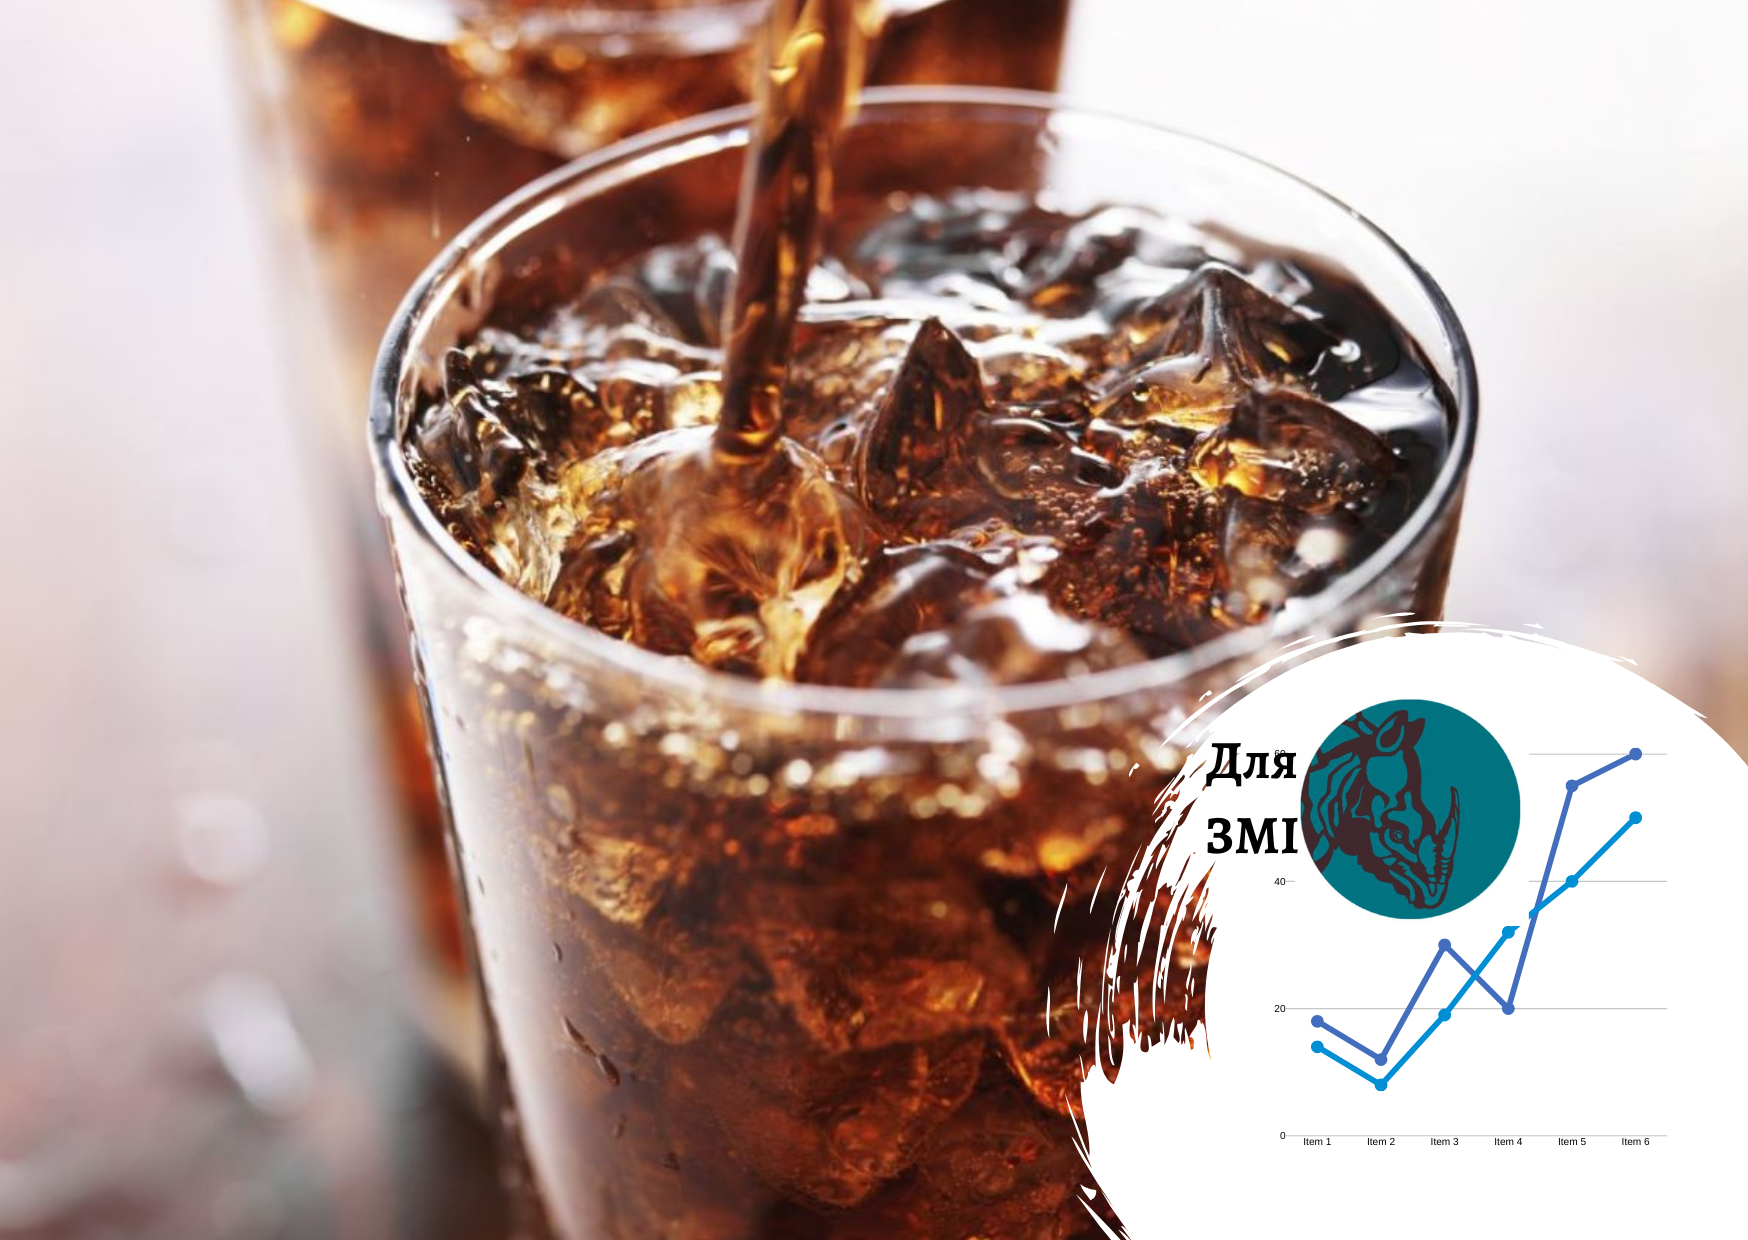 Manufacturers of soft drinks have doubled their tax payments in 2023 – Getmantsev. Market data by Pro-Consulting. FORBES